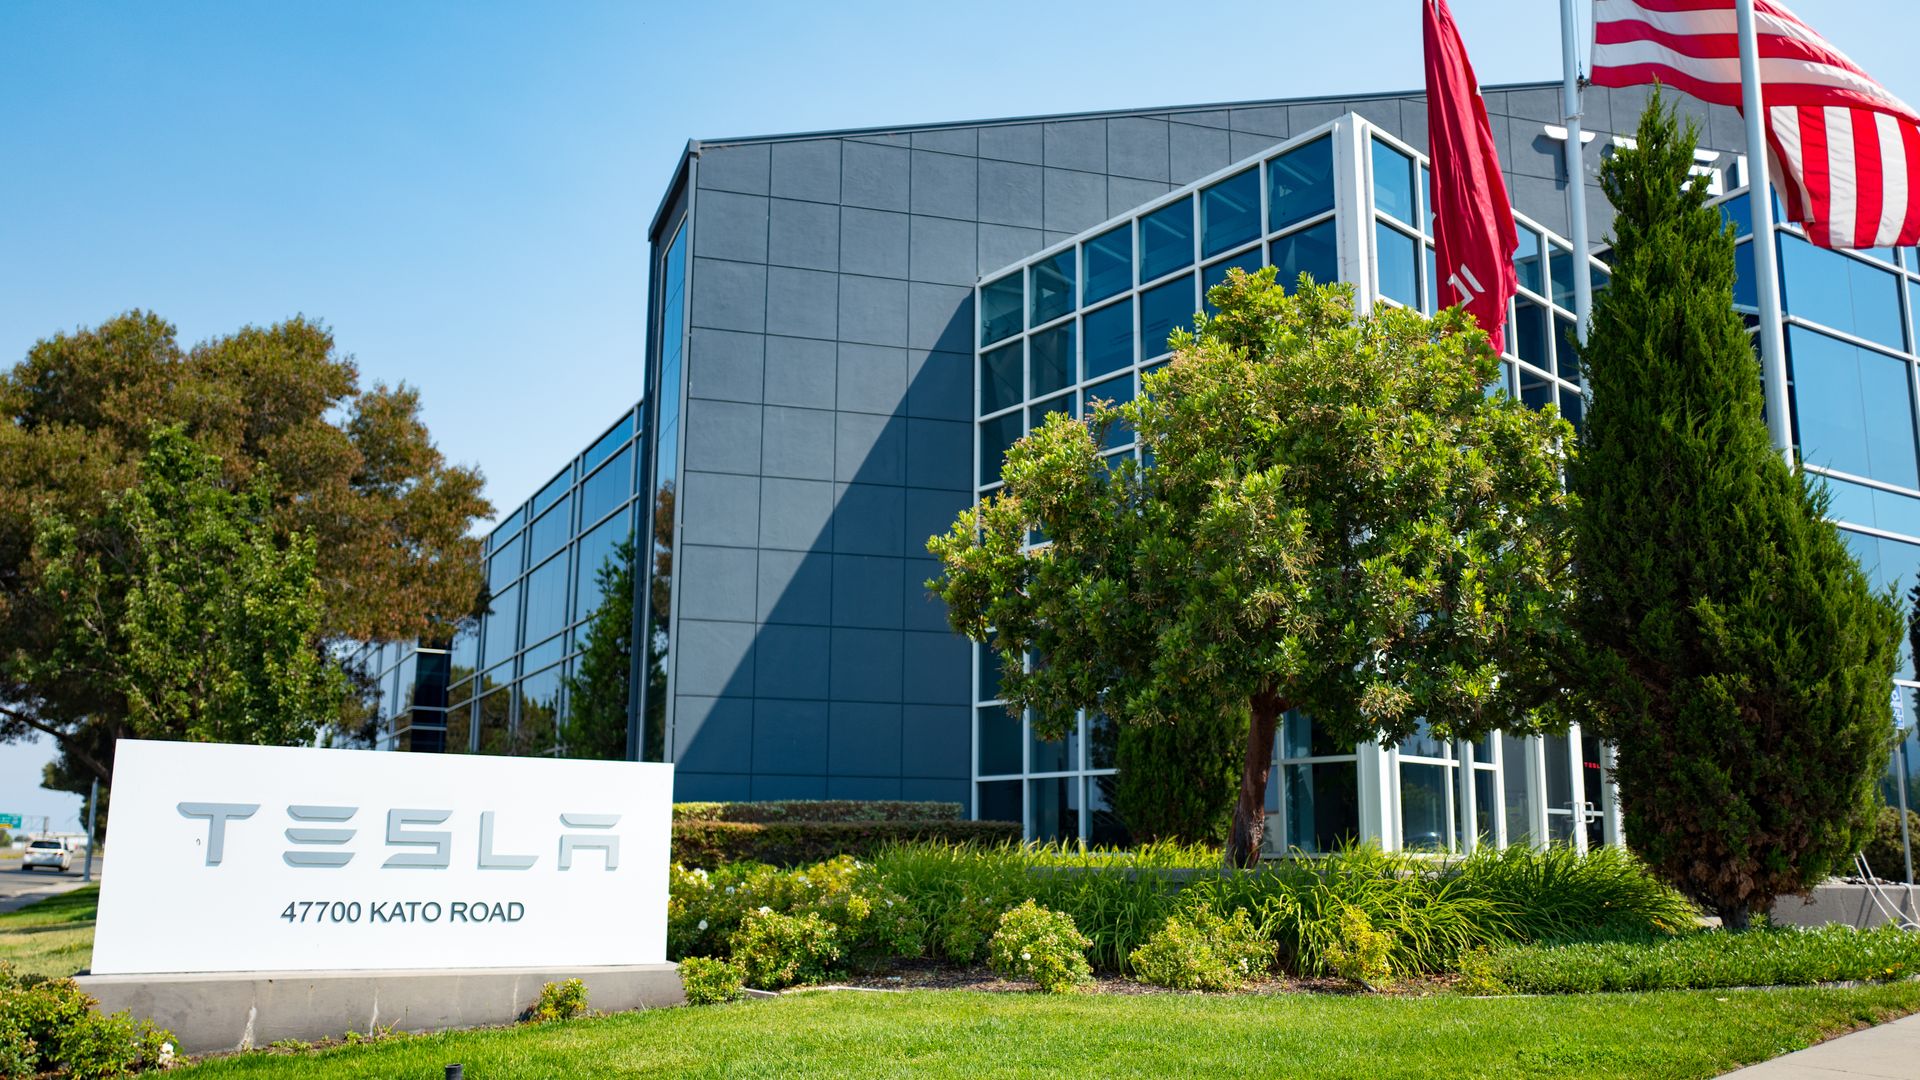 Tesla Motors in front of new glass building near the company's headquarters